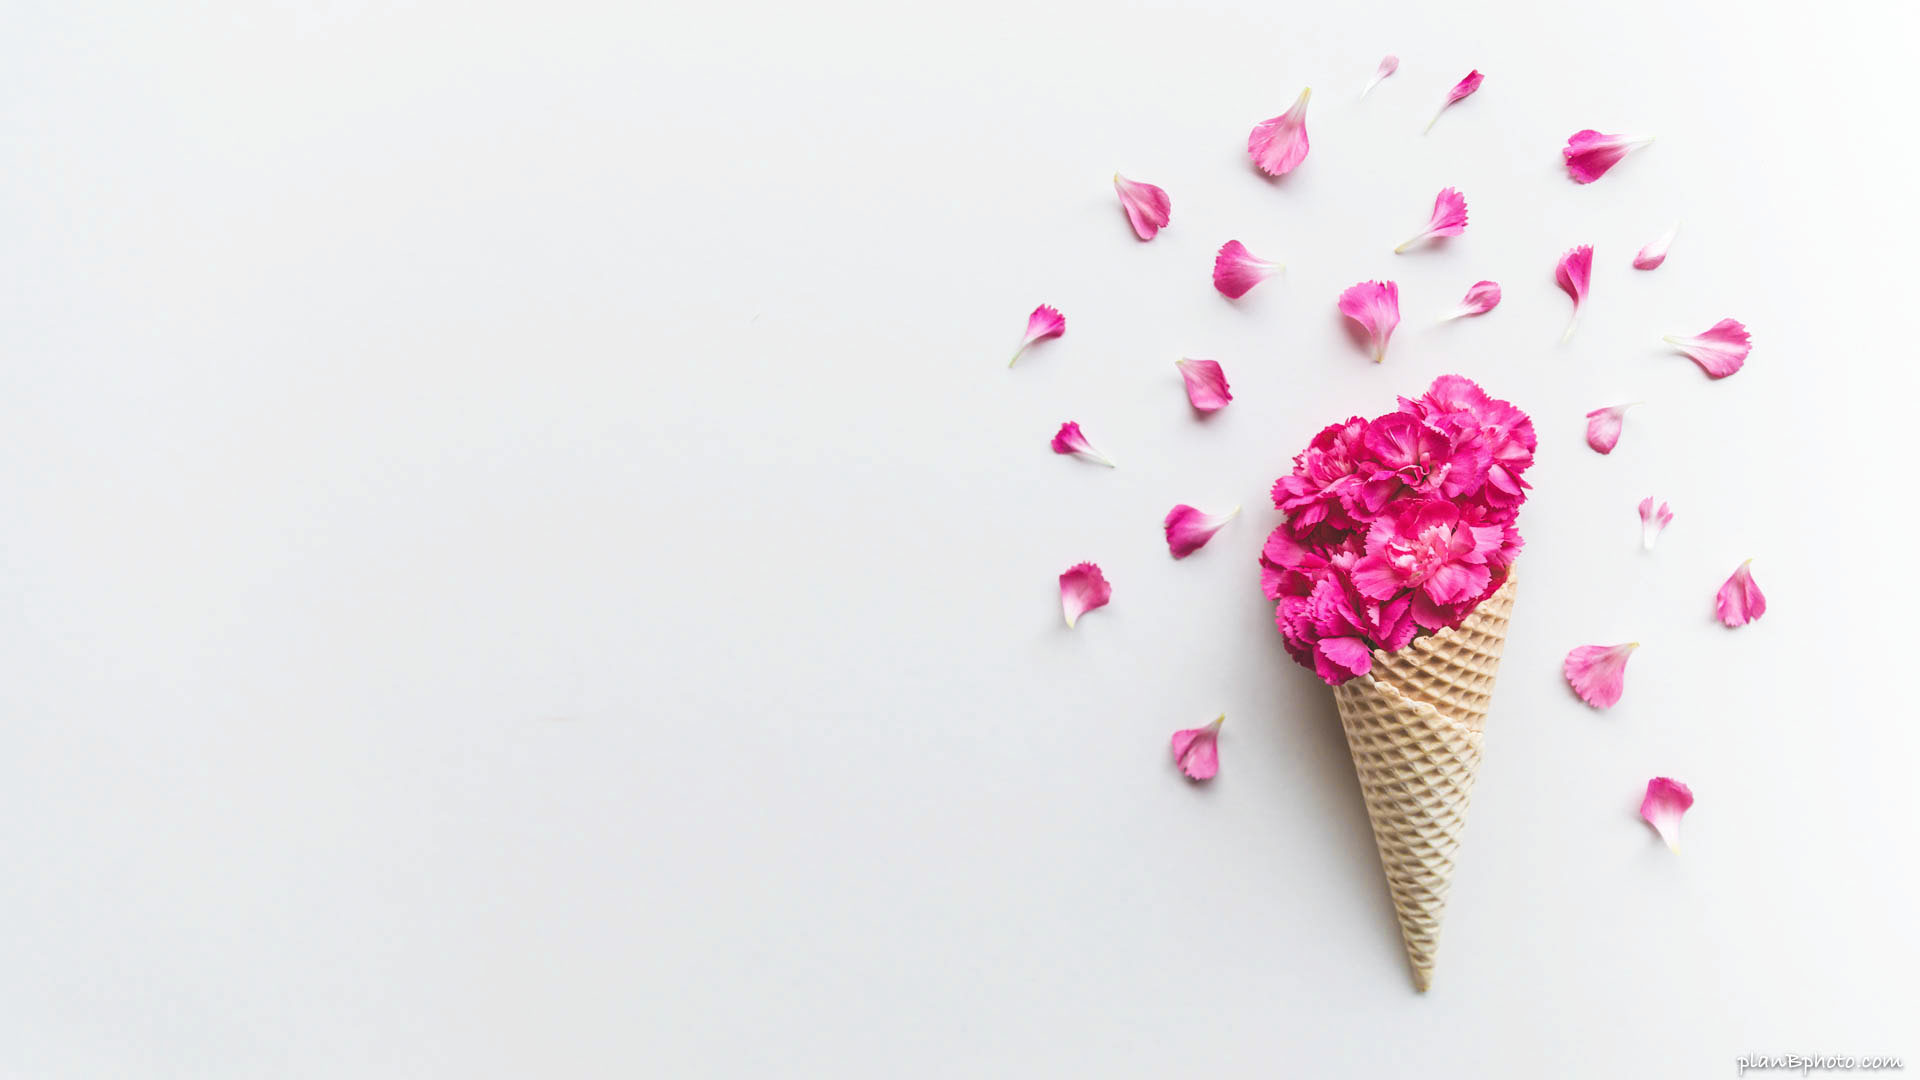 Carnation flowers in an ice-cream cone flatlay on a white background